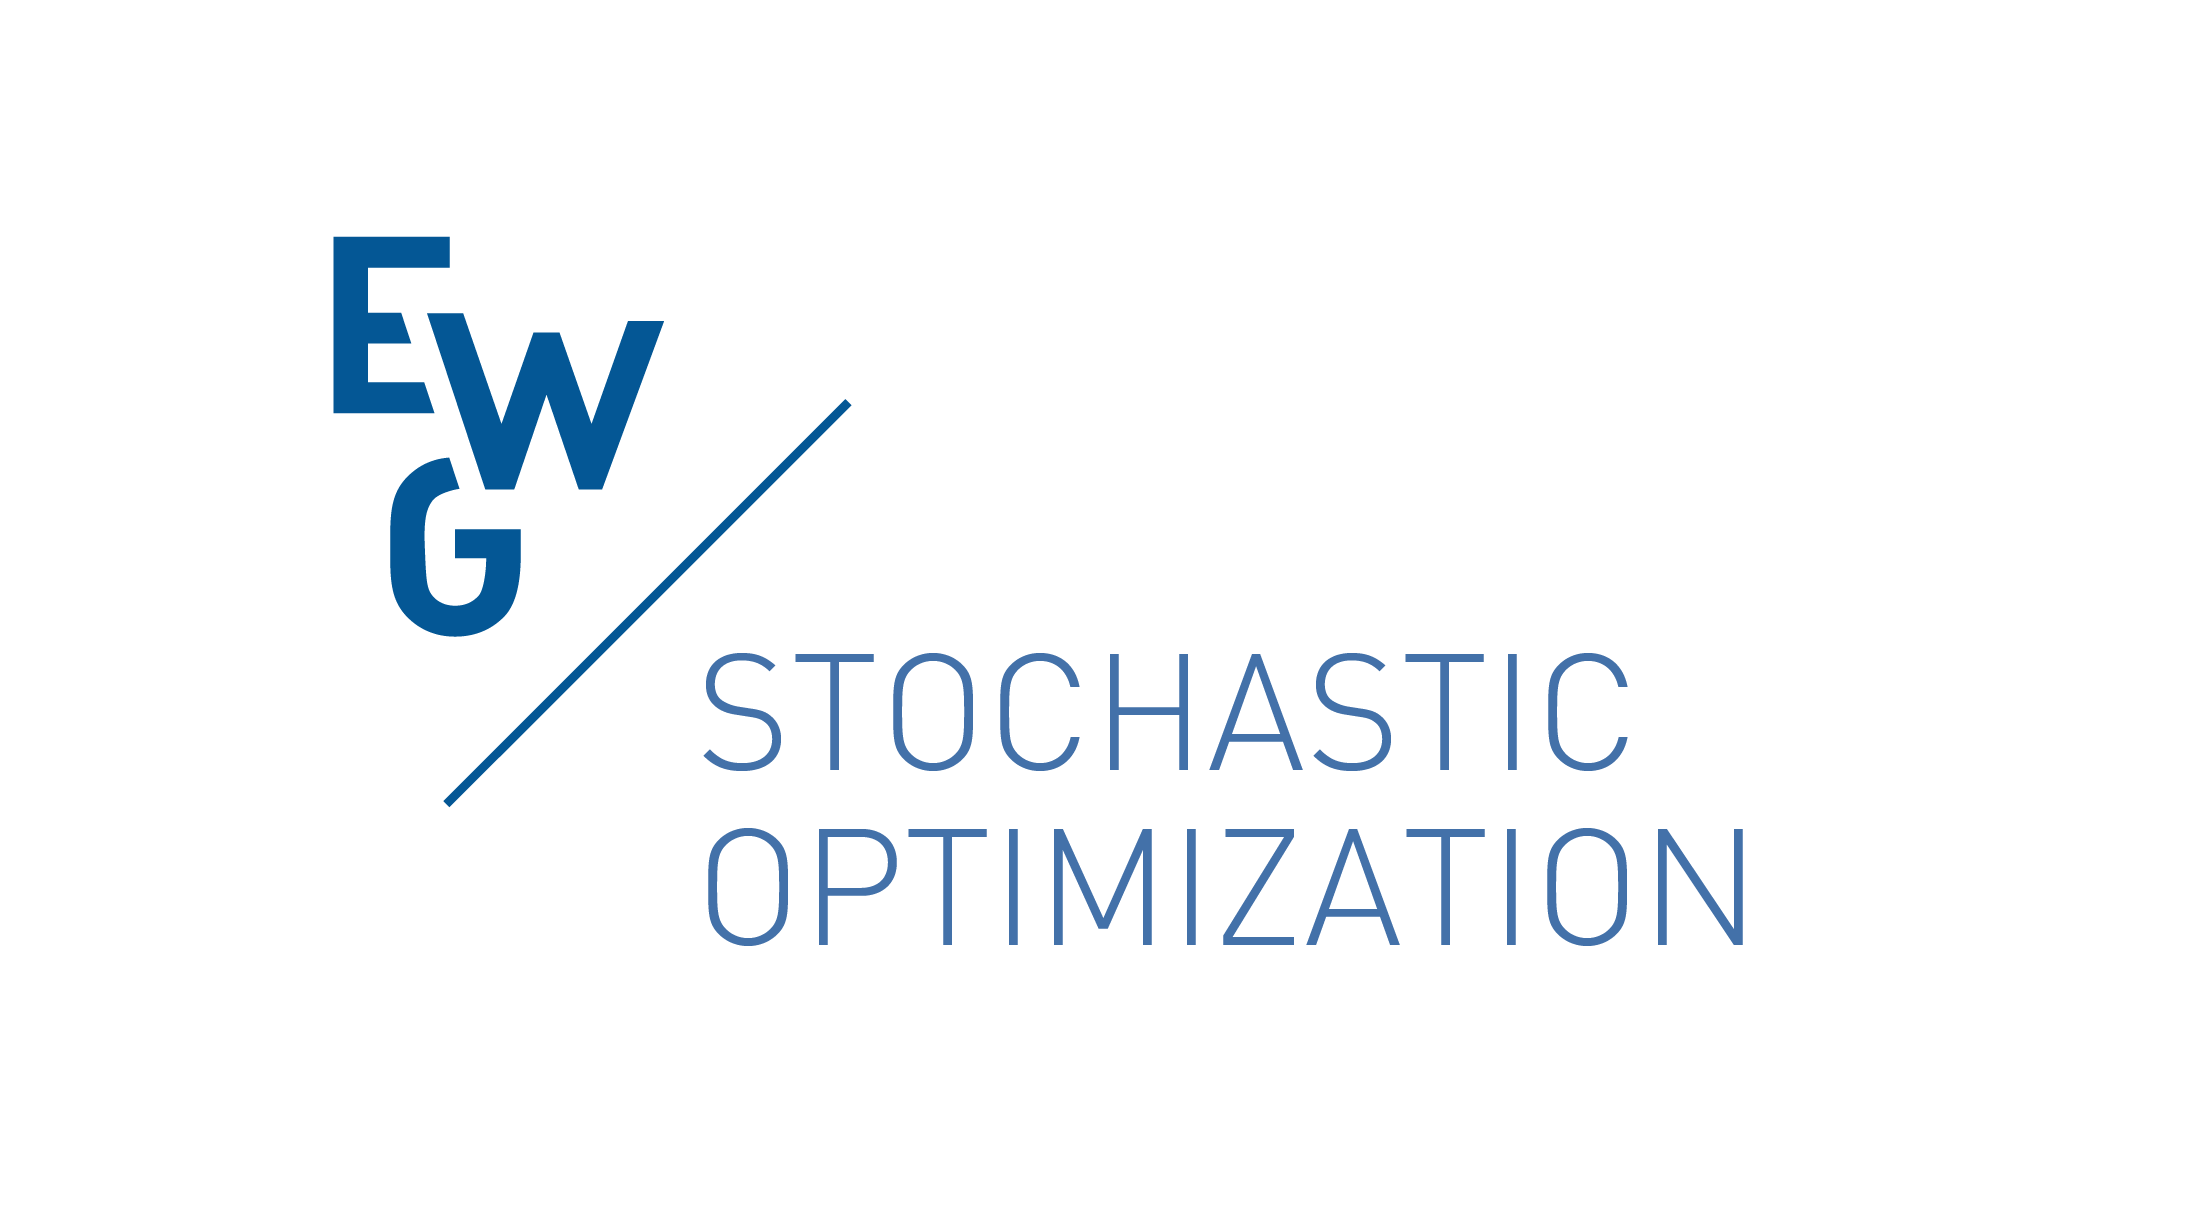 EURO working group on Stochastic Optimization